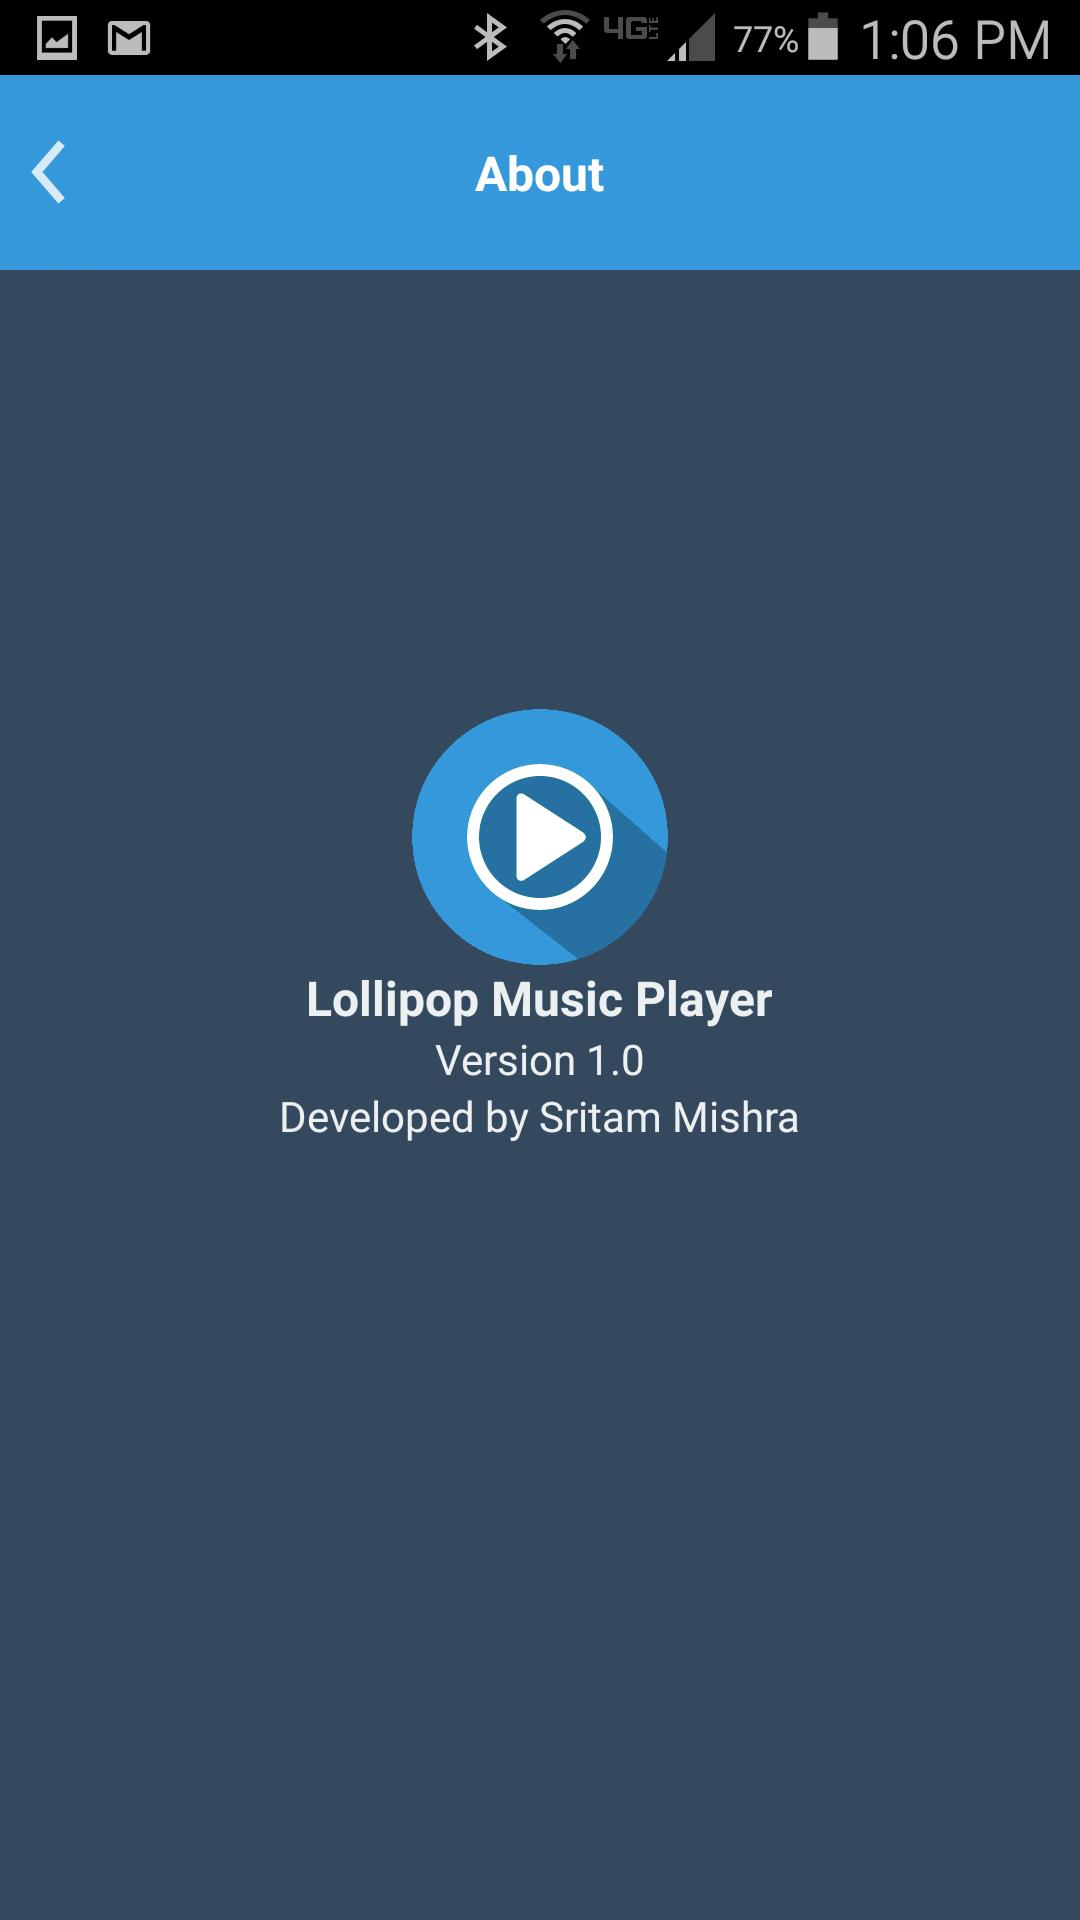 Lollipop Music Player For Android - APK Download